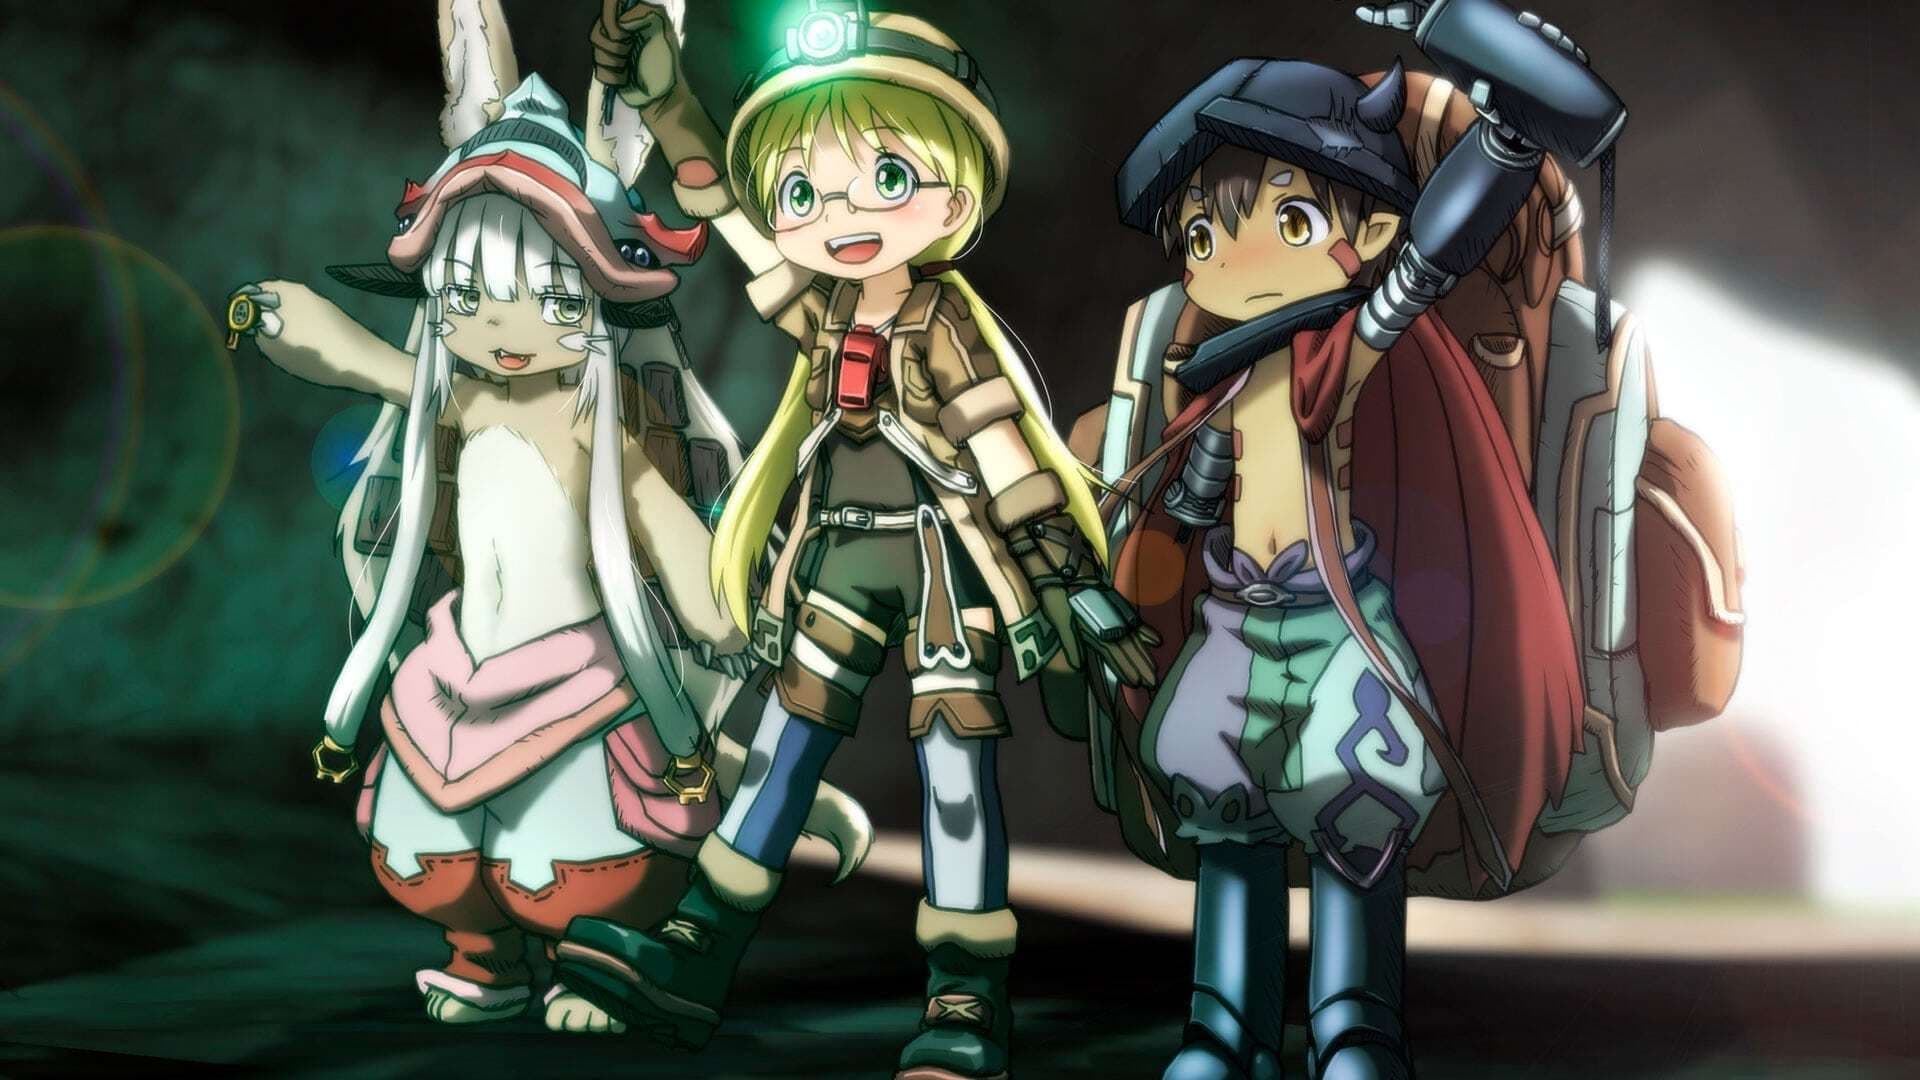 Made in Abyss: Wandering Twilight 2019 123movies